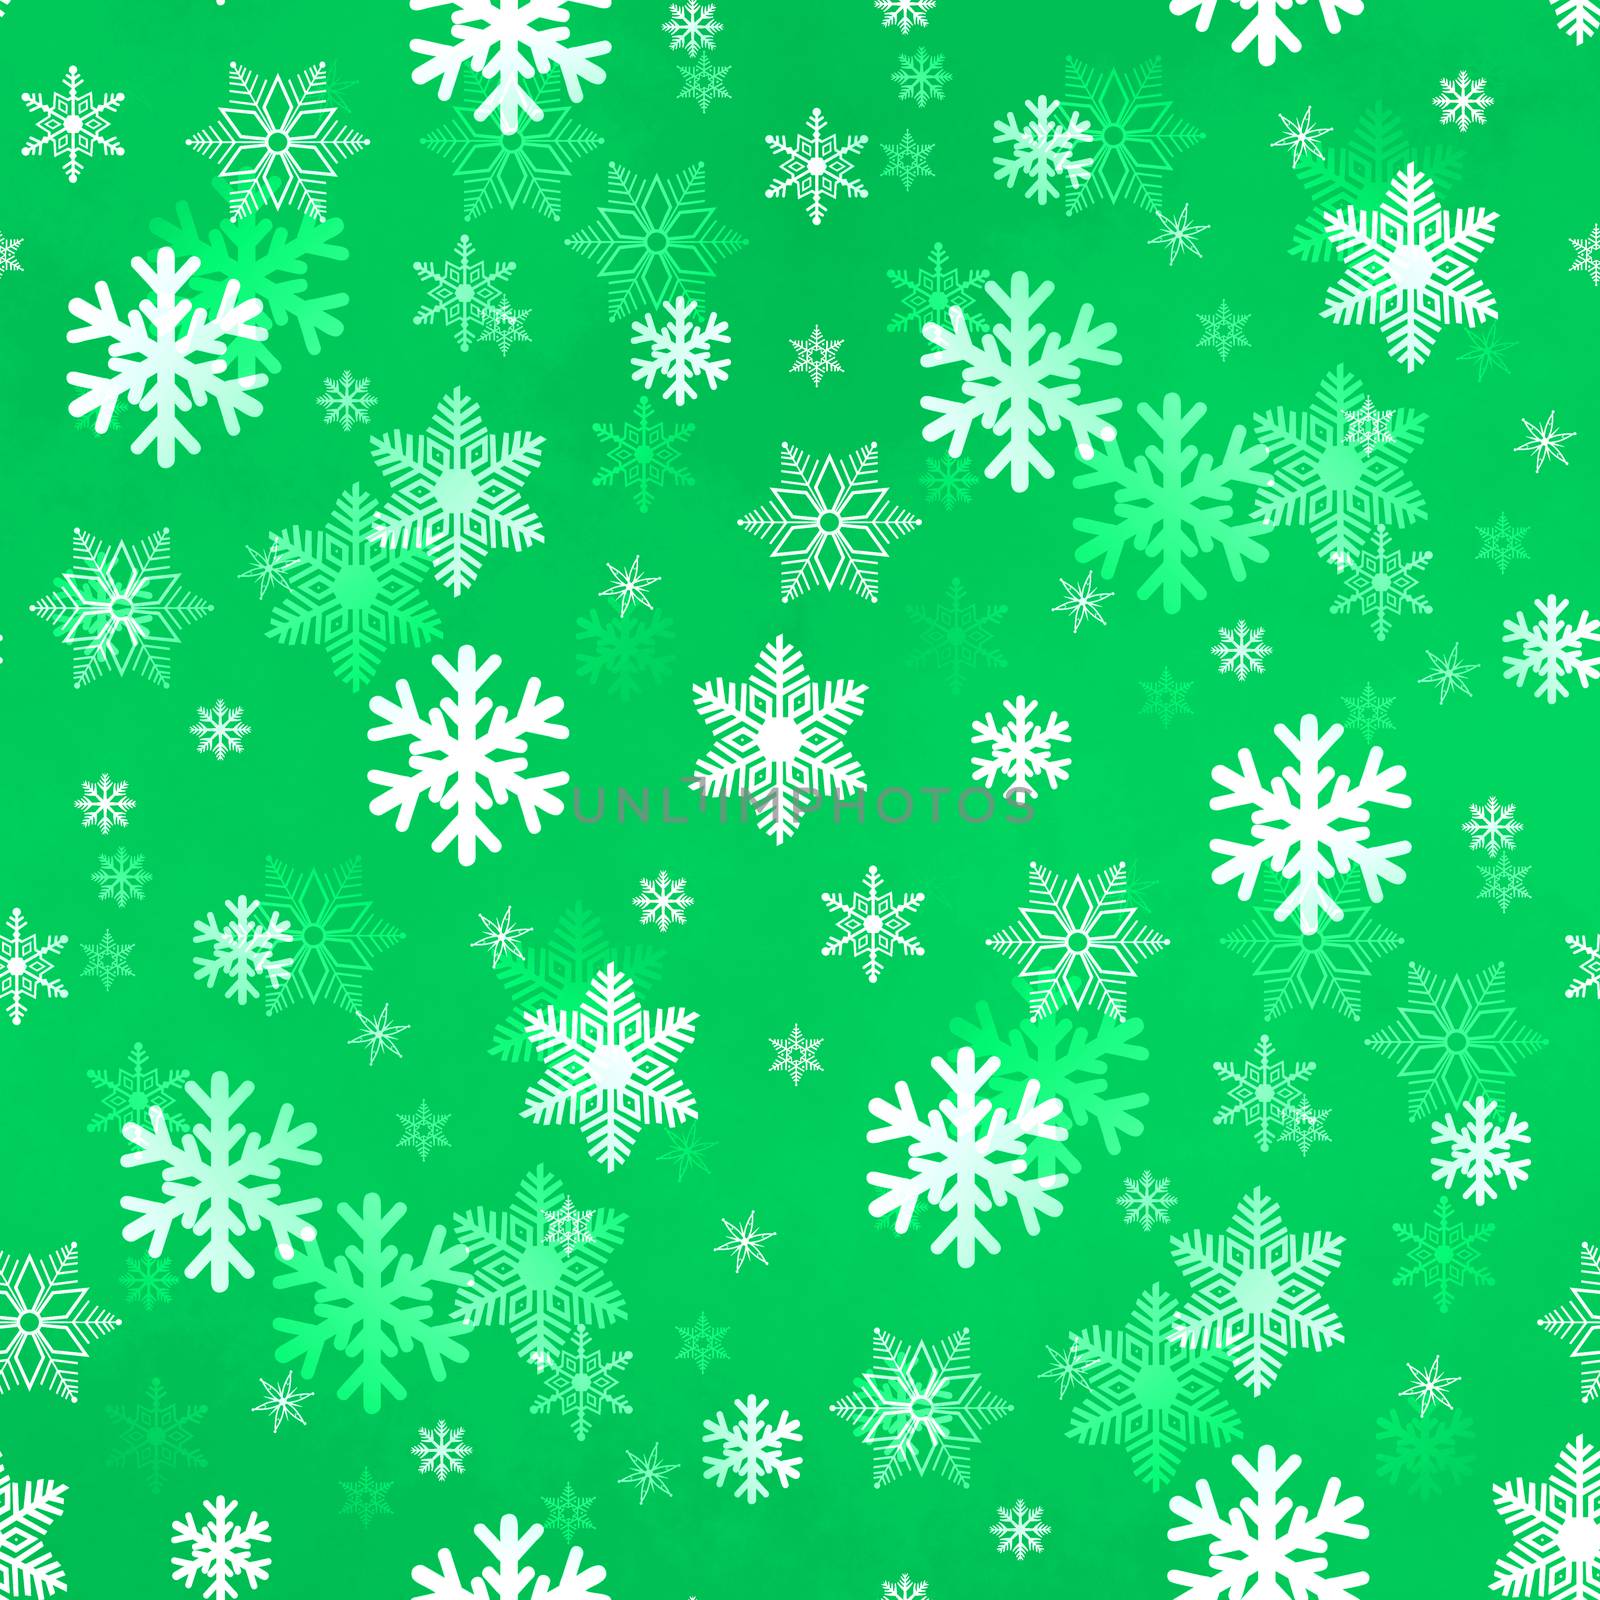 Light Green winter Christmas snowflakes with a seamless pattern as background image.